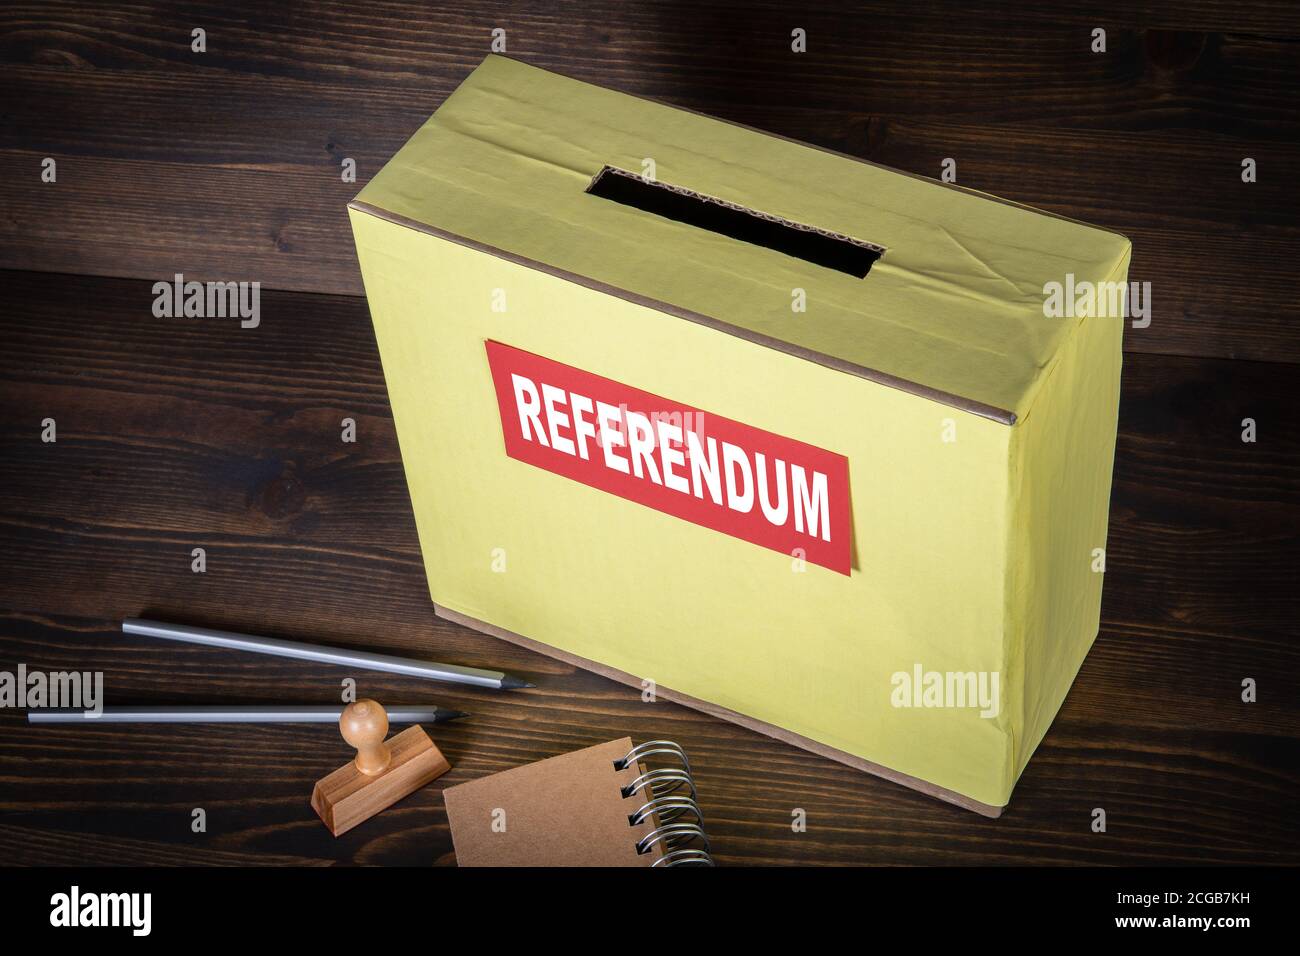 REFERENDUM. Ballot box on a wooden background. Pencils, stamp and notepad Stock Photo